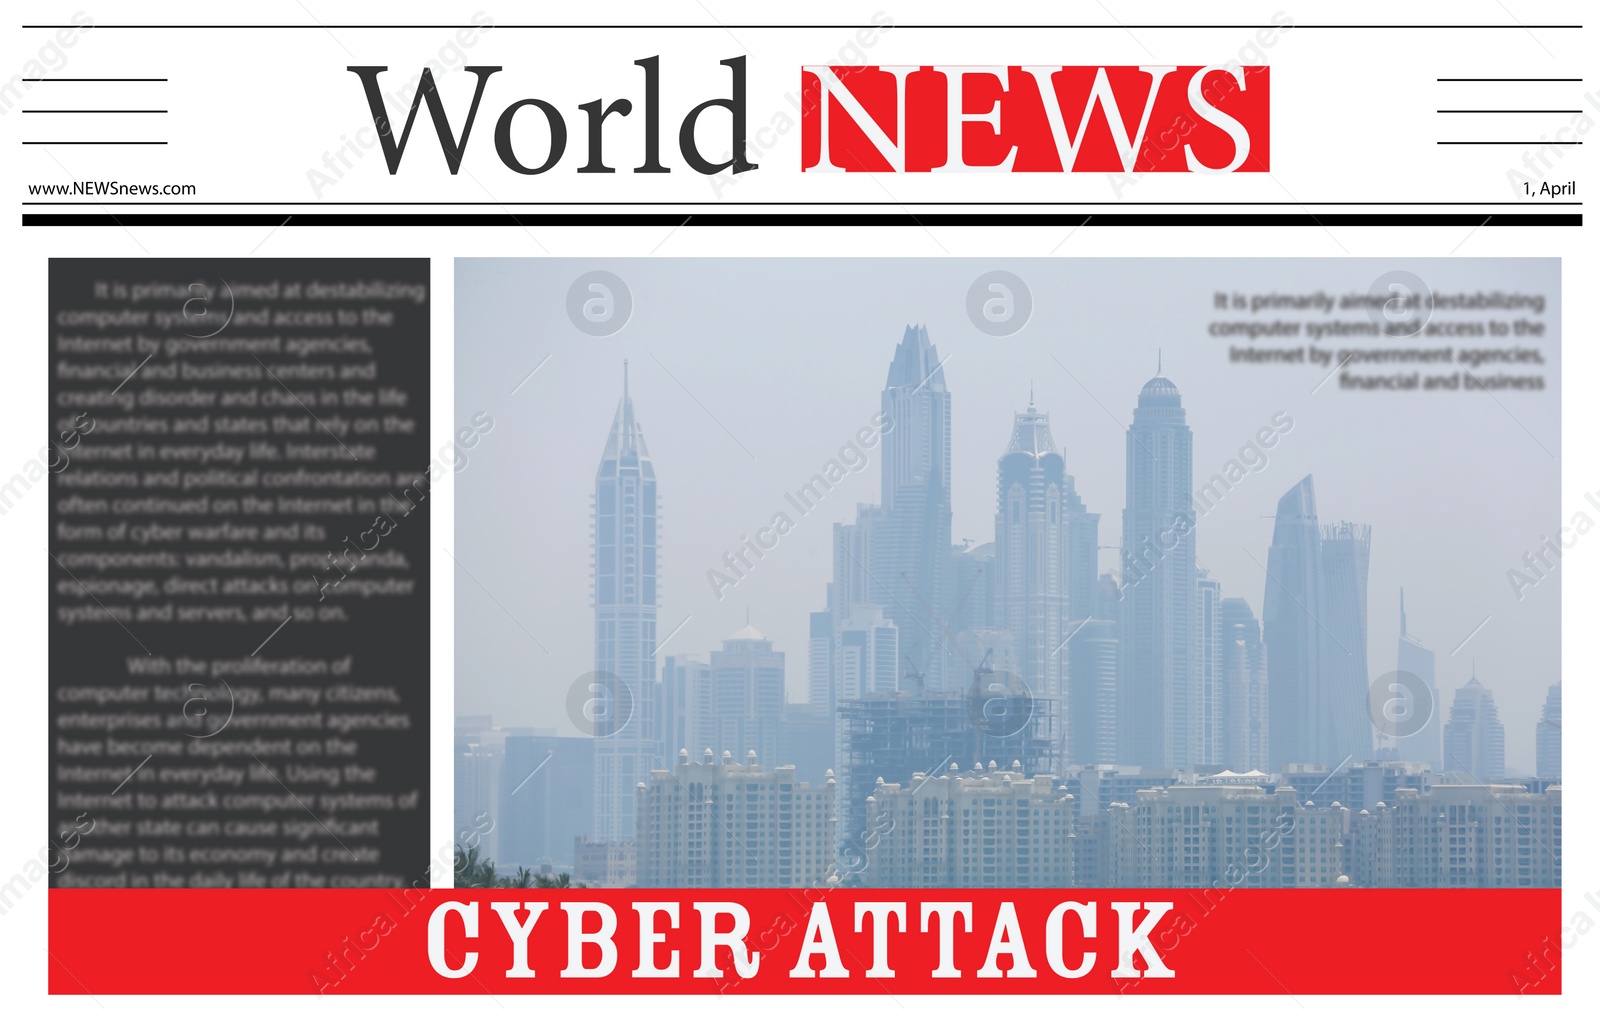 Image of Closeup view of newspaper with headline CYBER ATTACK